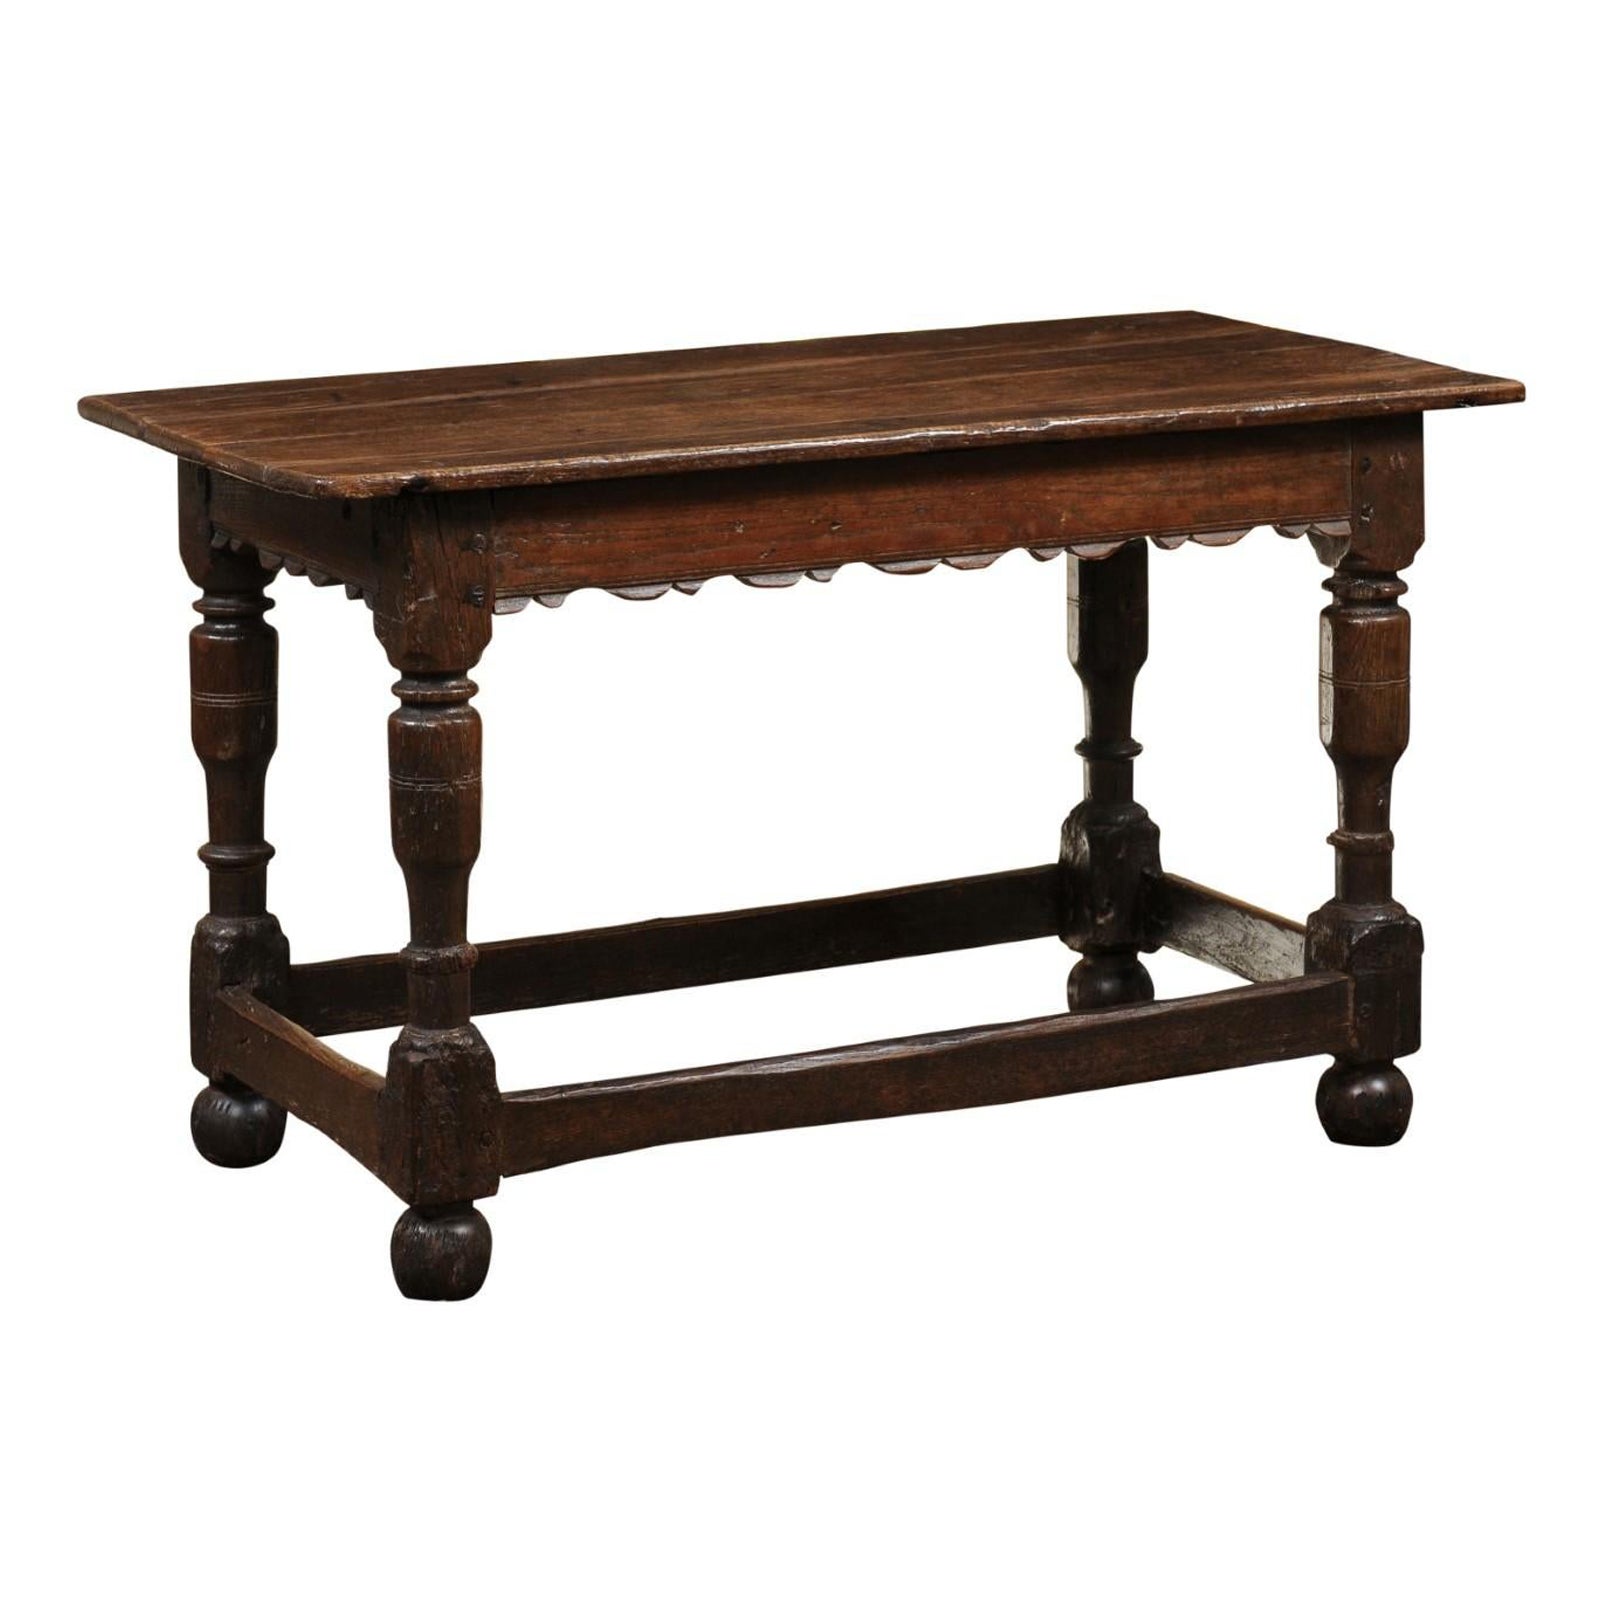 Early 18th C Oak Console Table with Carved Apron, Turned Legs & Box stretcher